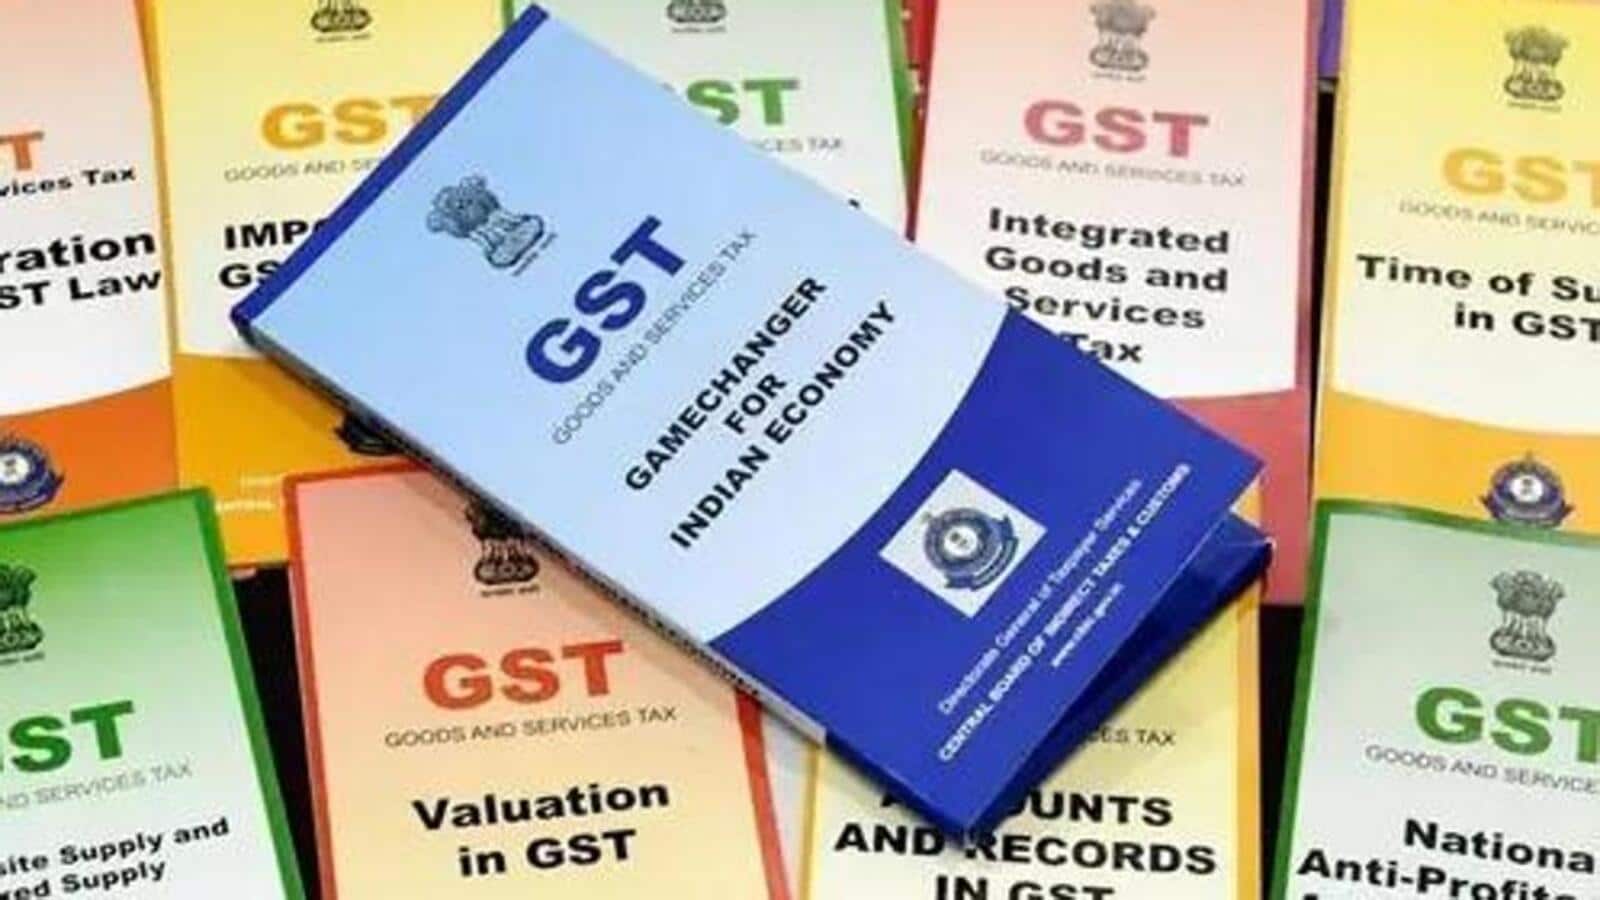 Superintendents won’t be part of GST day celebrations, demand improvements first